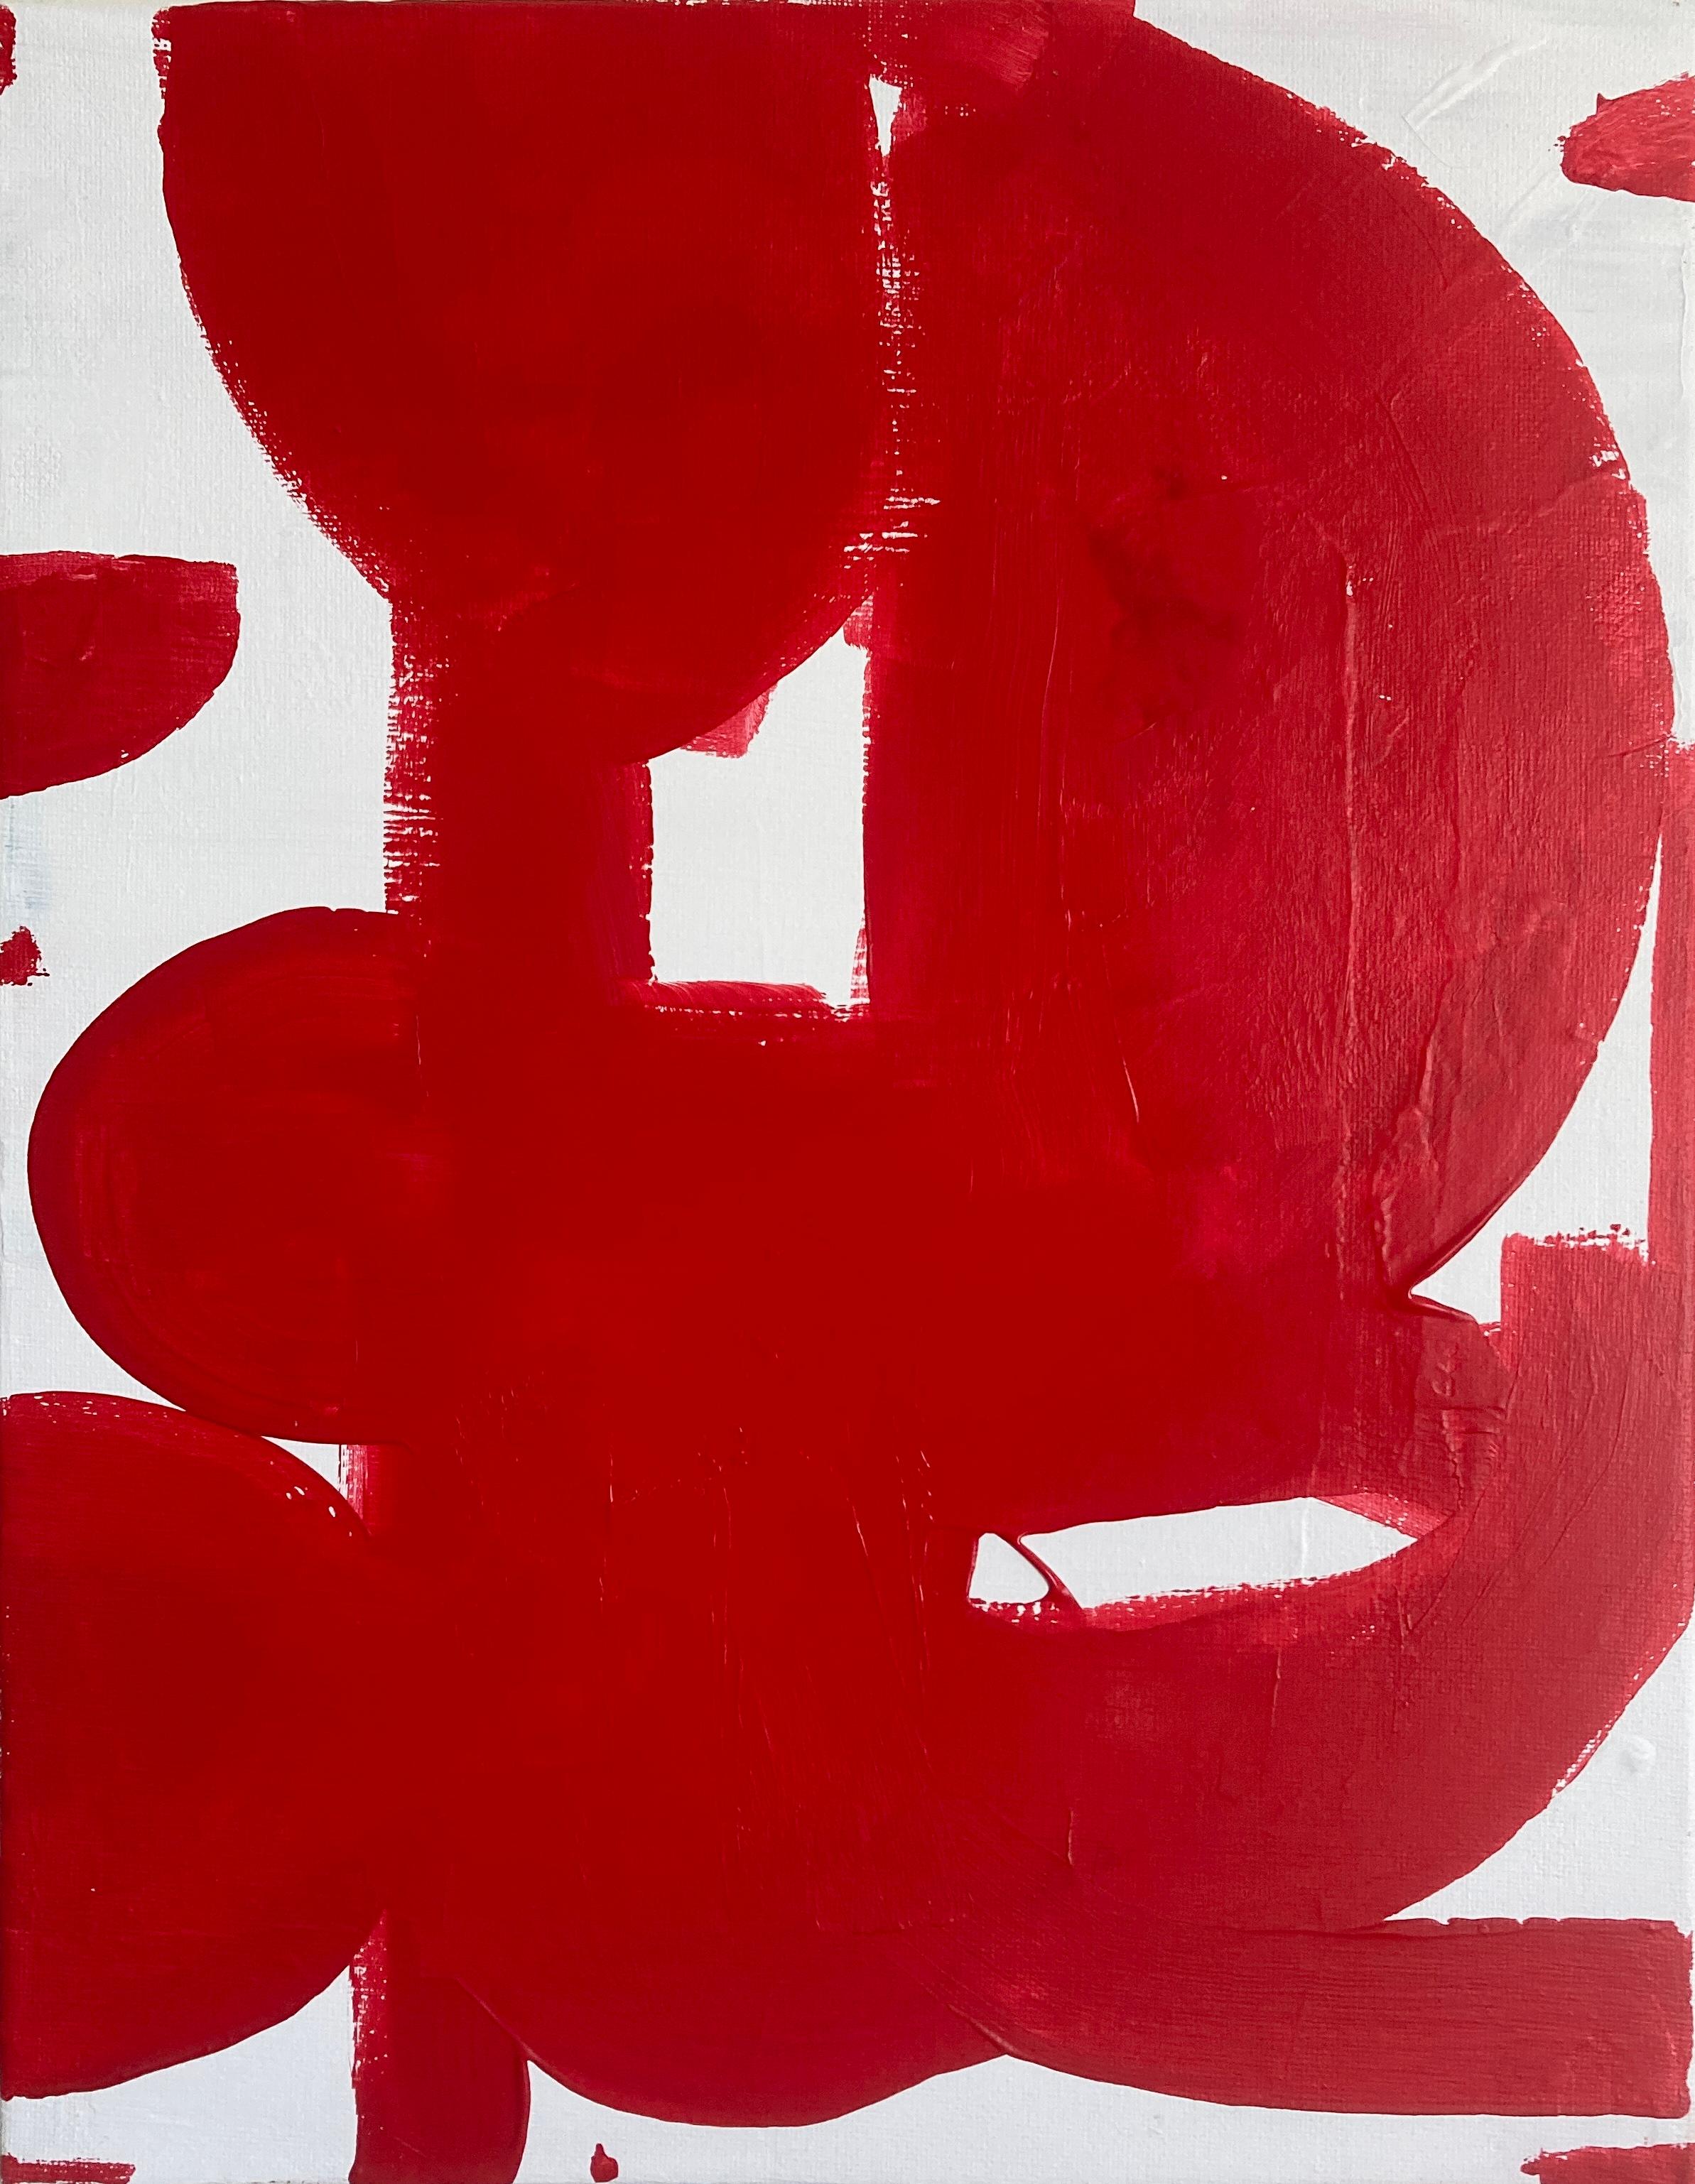 Shifting Spheres uses bold red semi glossy acrylic paint to create dynamic figure / ground relationships using a mostly rounded shapes. Painted using a brush and a rubber scraping tool, moments of chance and intention are explored throughout the